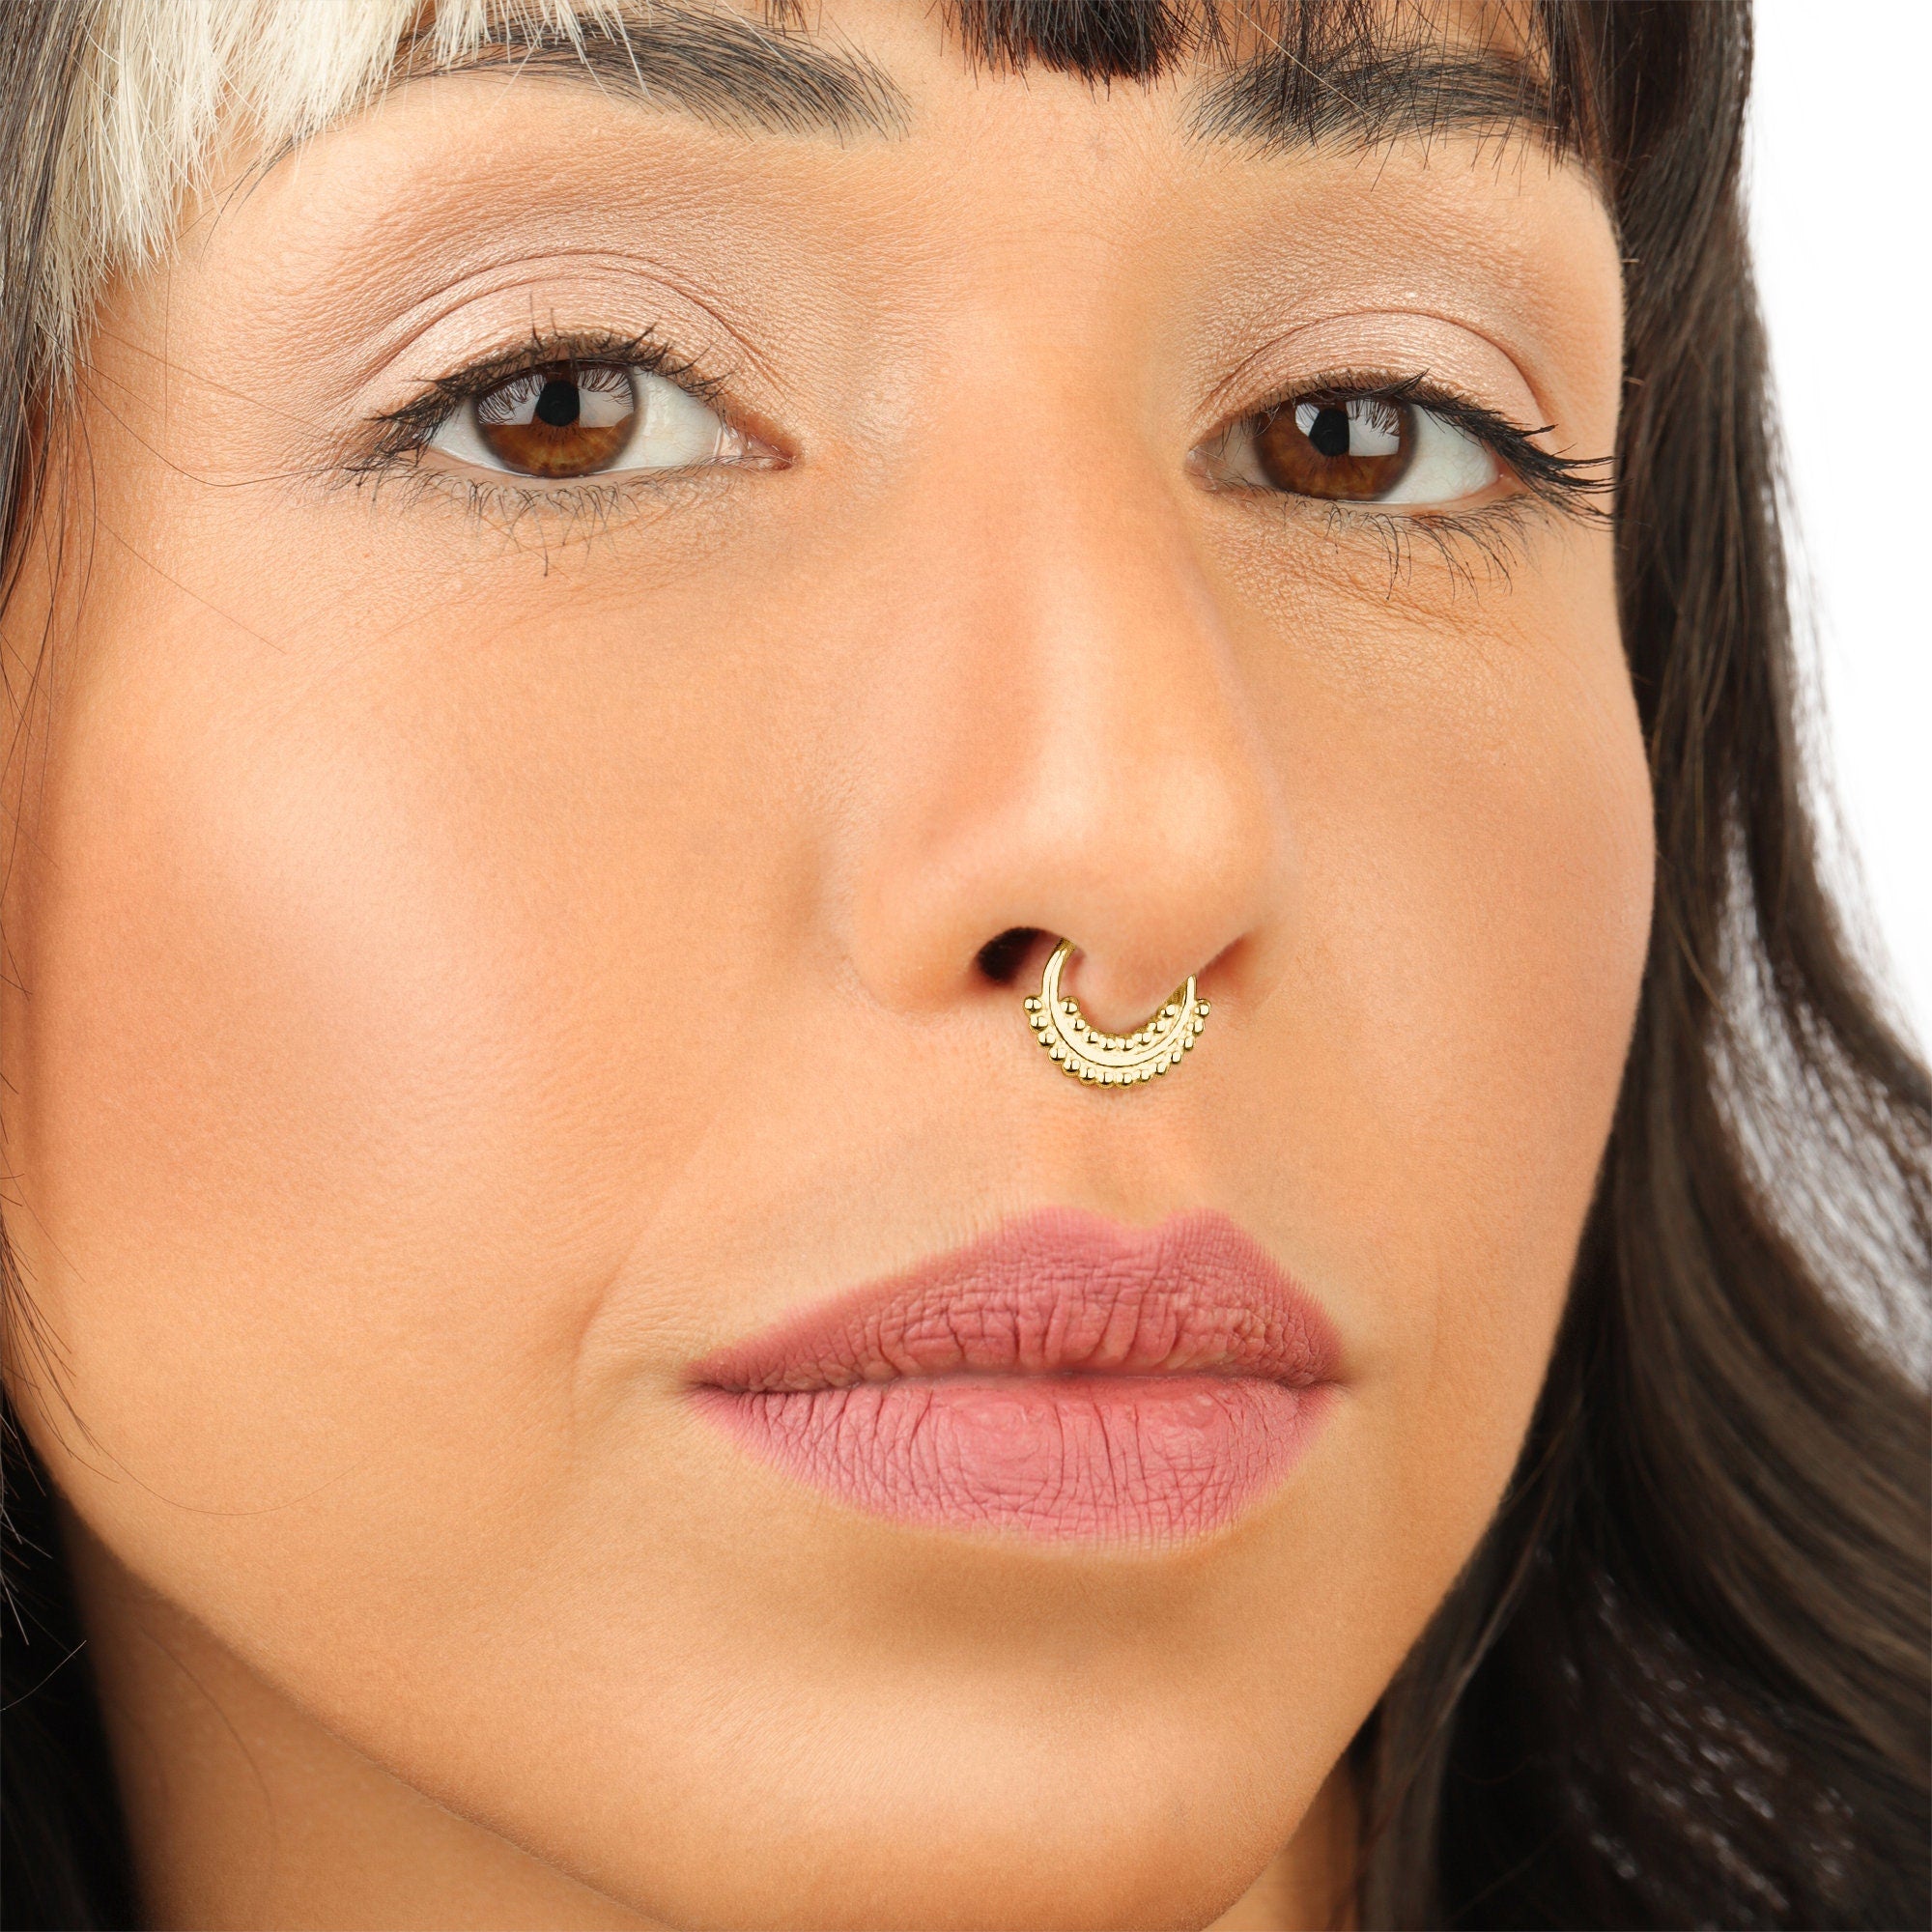 Buy 925 Silver Nosering/Septum Ring - Rays Nosering/Septum Ring Quirksmith